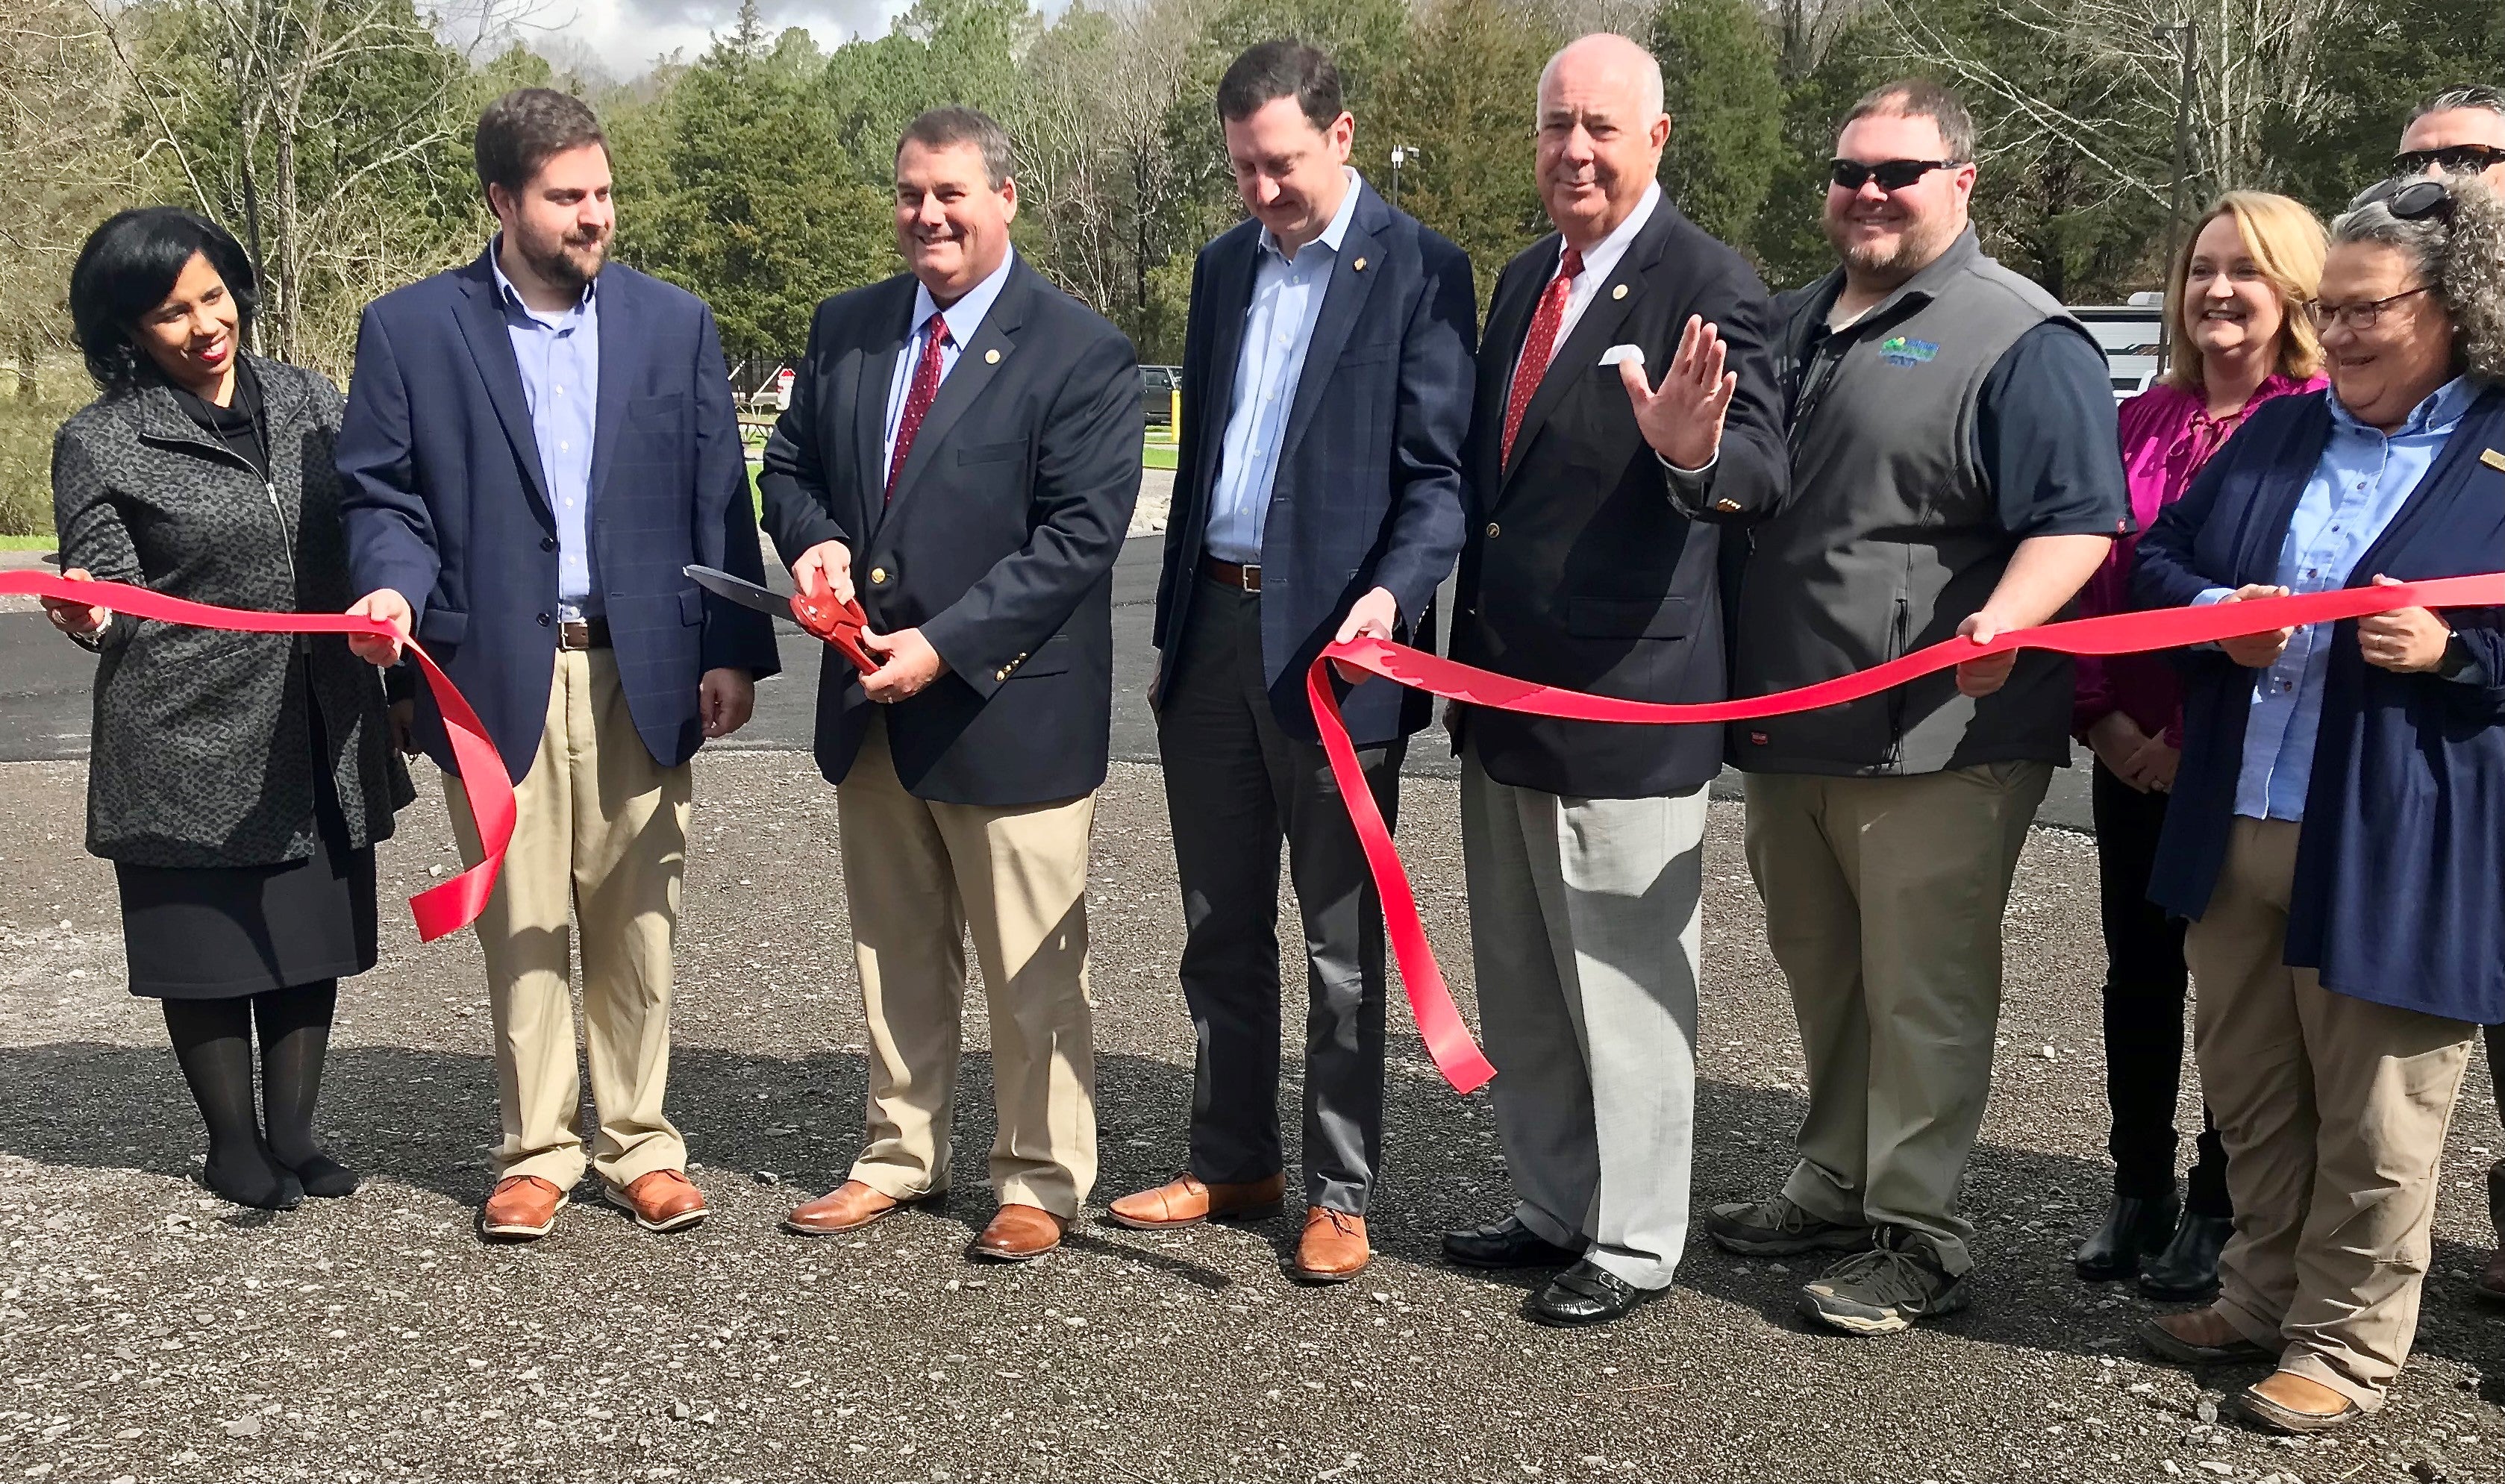 Alabama Department of Conservation and Natural Resources Commissioner Chris Blankenship cuts the ceremonial ribbon to formally open the new campground at Cathedral Caverns State Park. He is flanked by state Rep. Wes Kitchens, state Sen. Clay Scofield, ADECA Director Kenneth Boswell, CCSP Superintendent Chris Bentley, and Katy Norton, president of Marshall County Tourism and Sports.